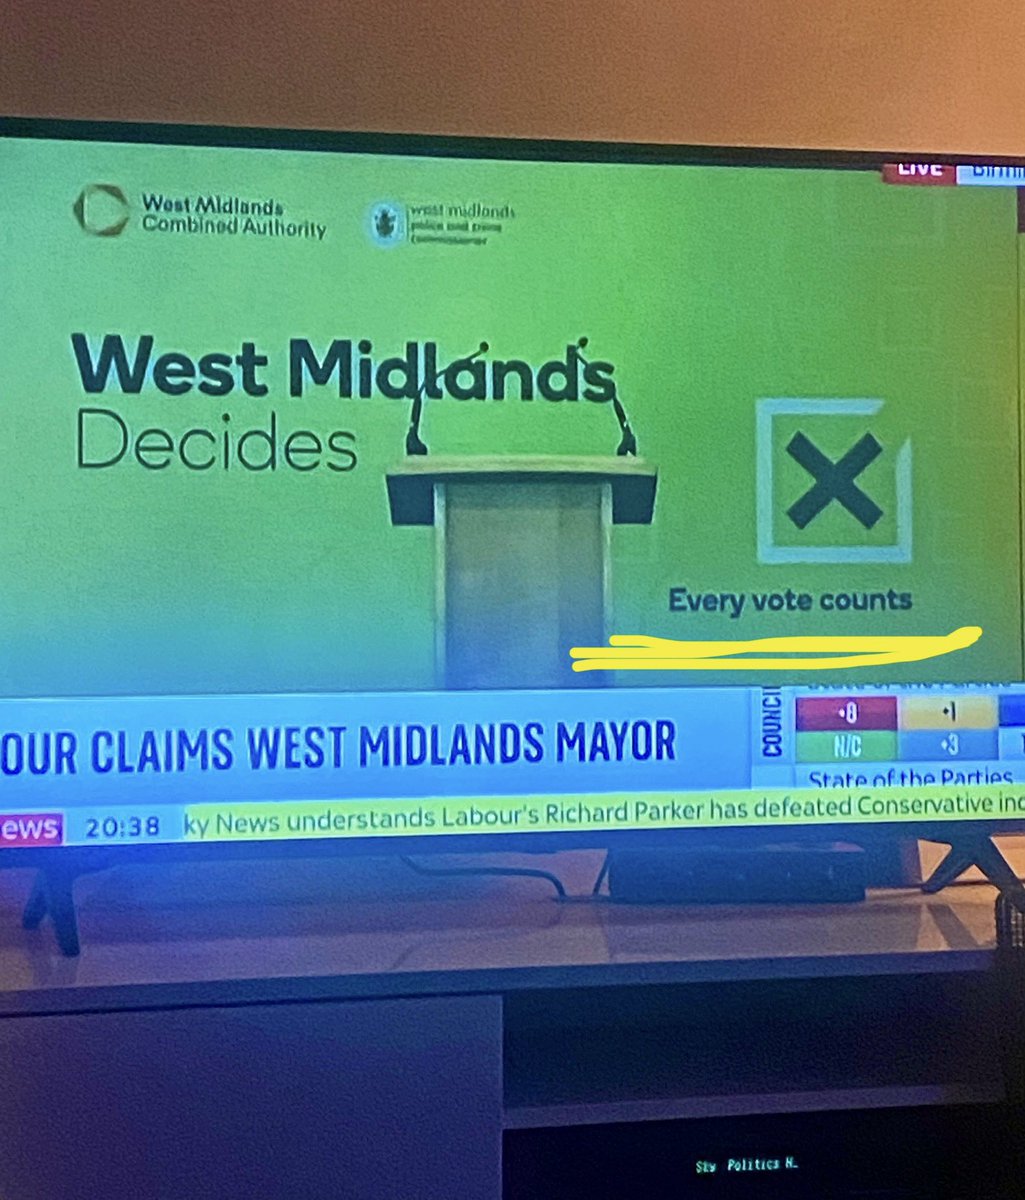 Waiting on the knife-edge #WestMidlands Mayoral results… whichever way it falls - the backdrop got it right..

#EveryVoteCounts